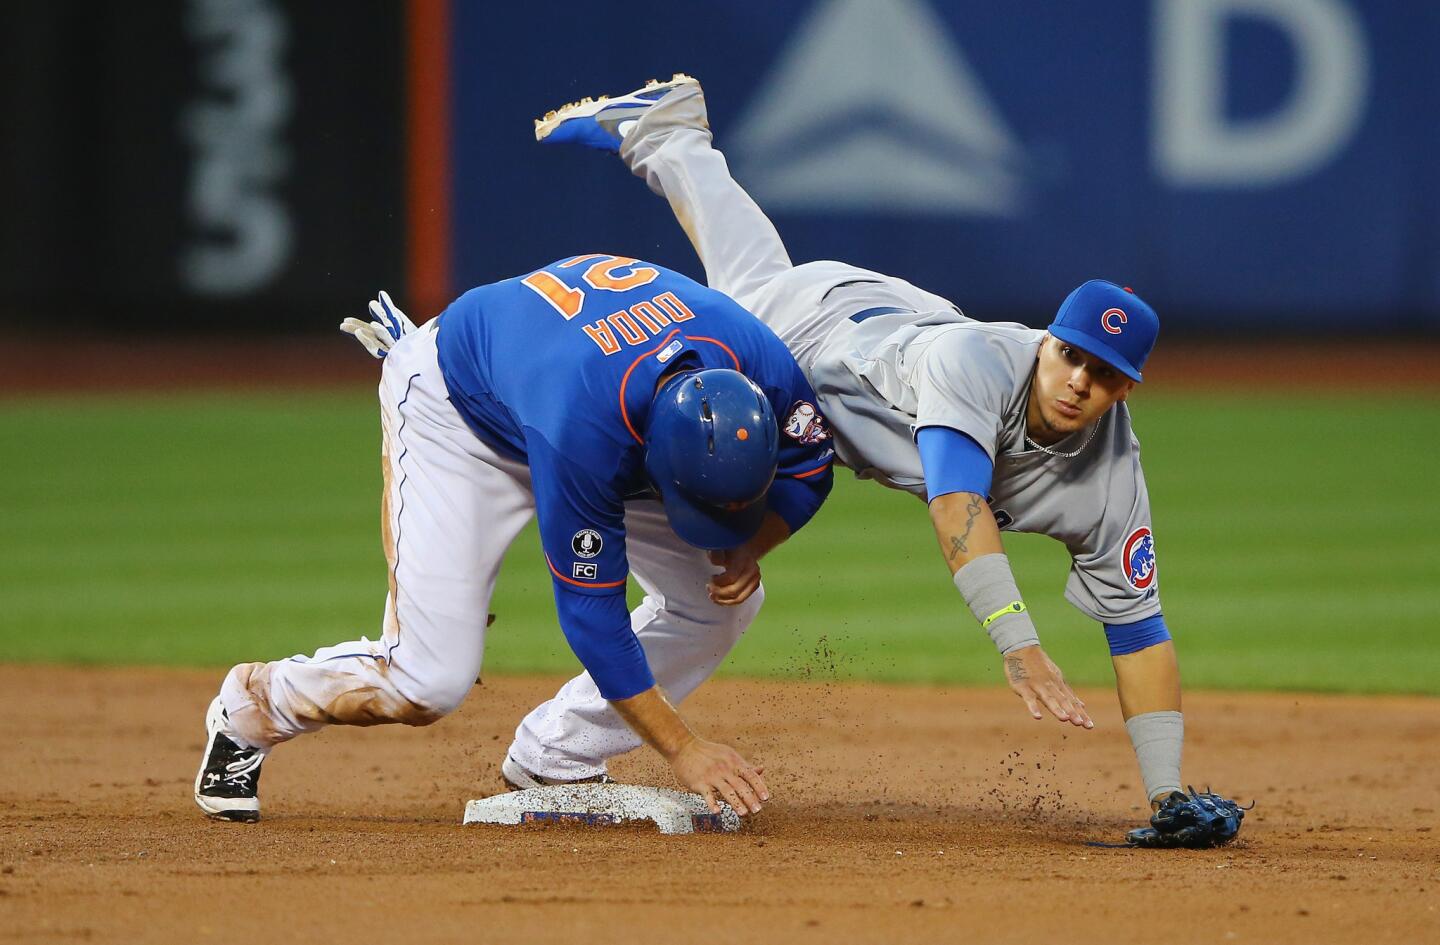 Javier Baez attempting to turn a double play